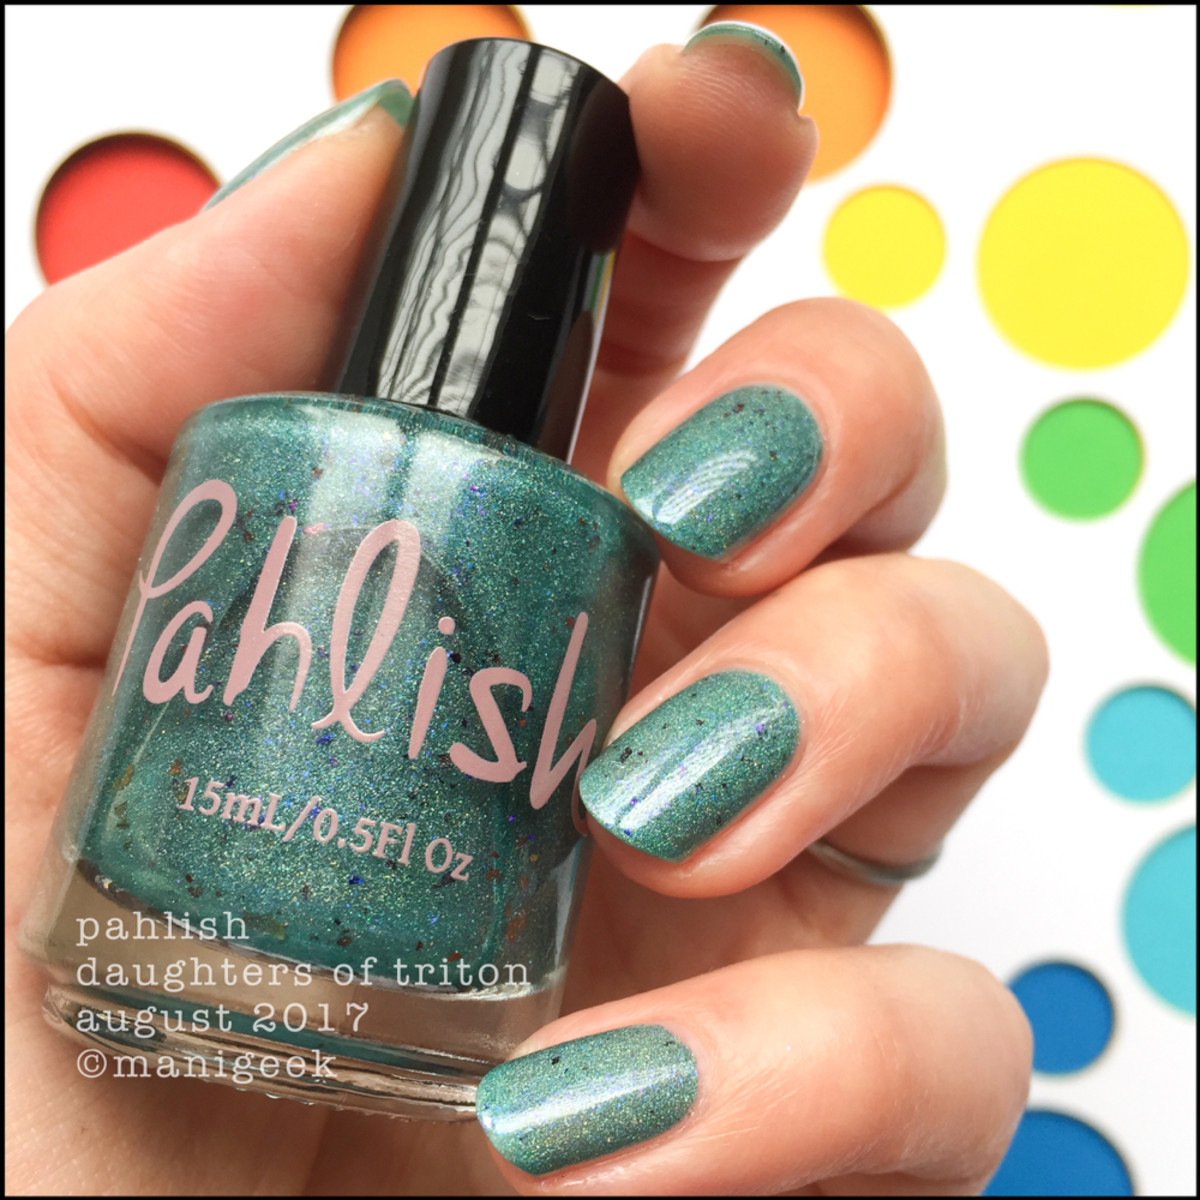 Pahlish Daughters of Triton Swatches _ Pahlish August 2017 Swatches Review